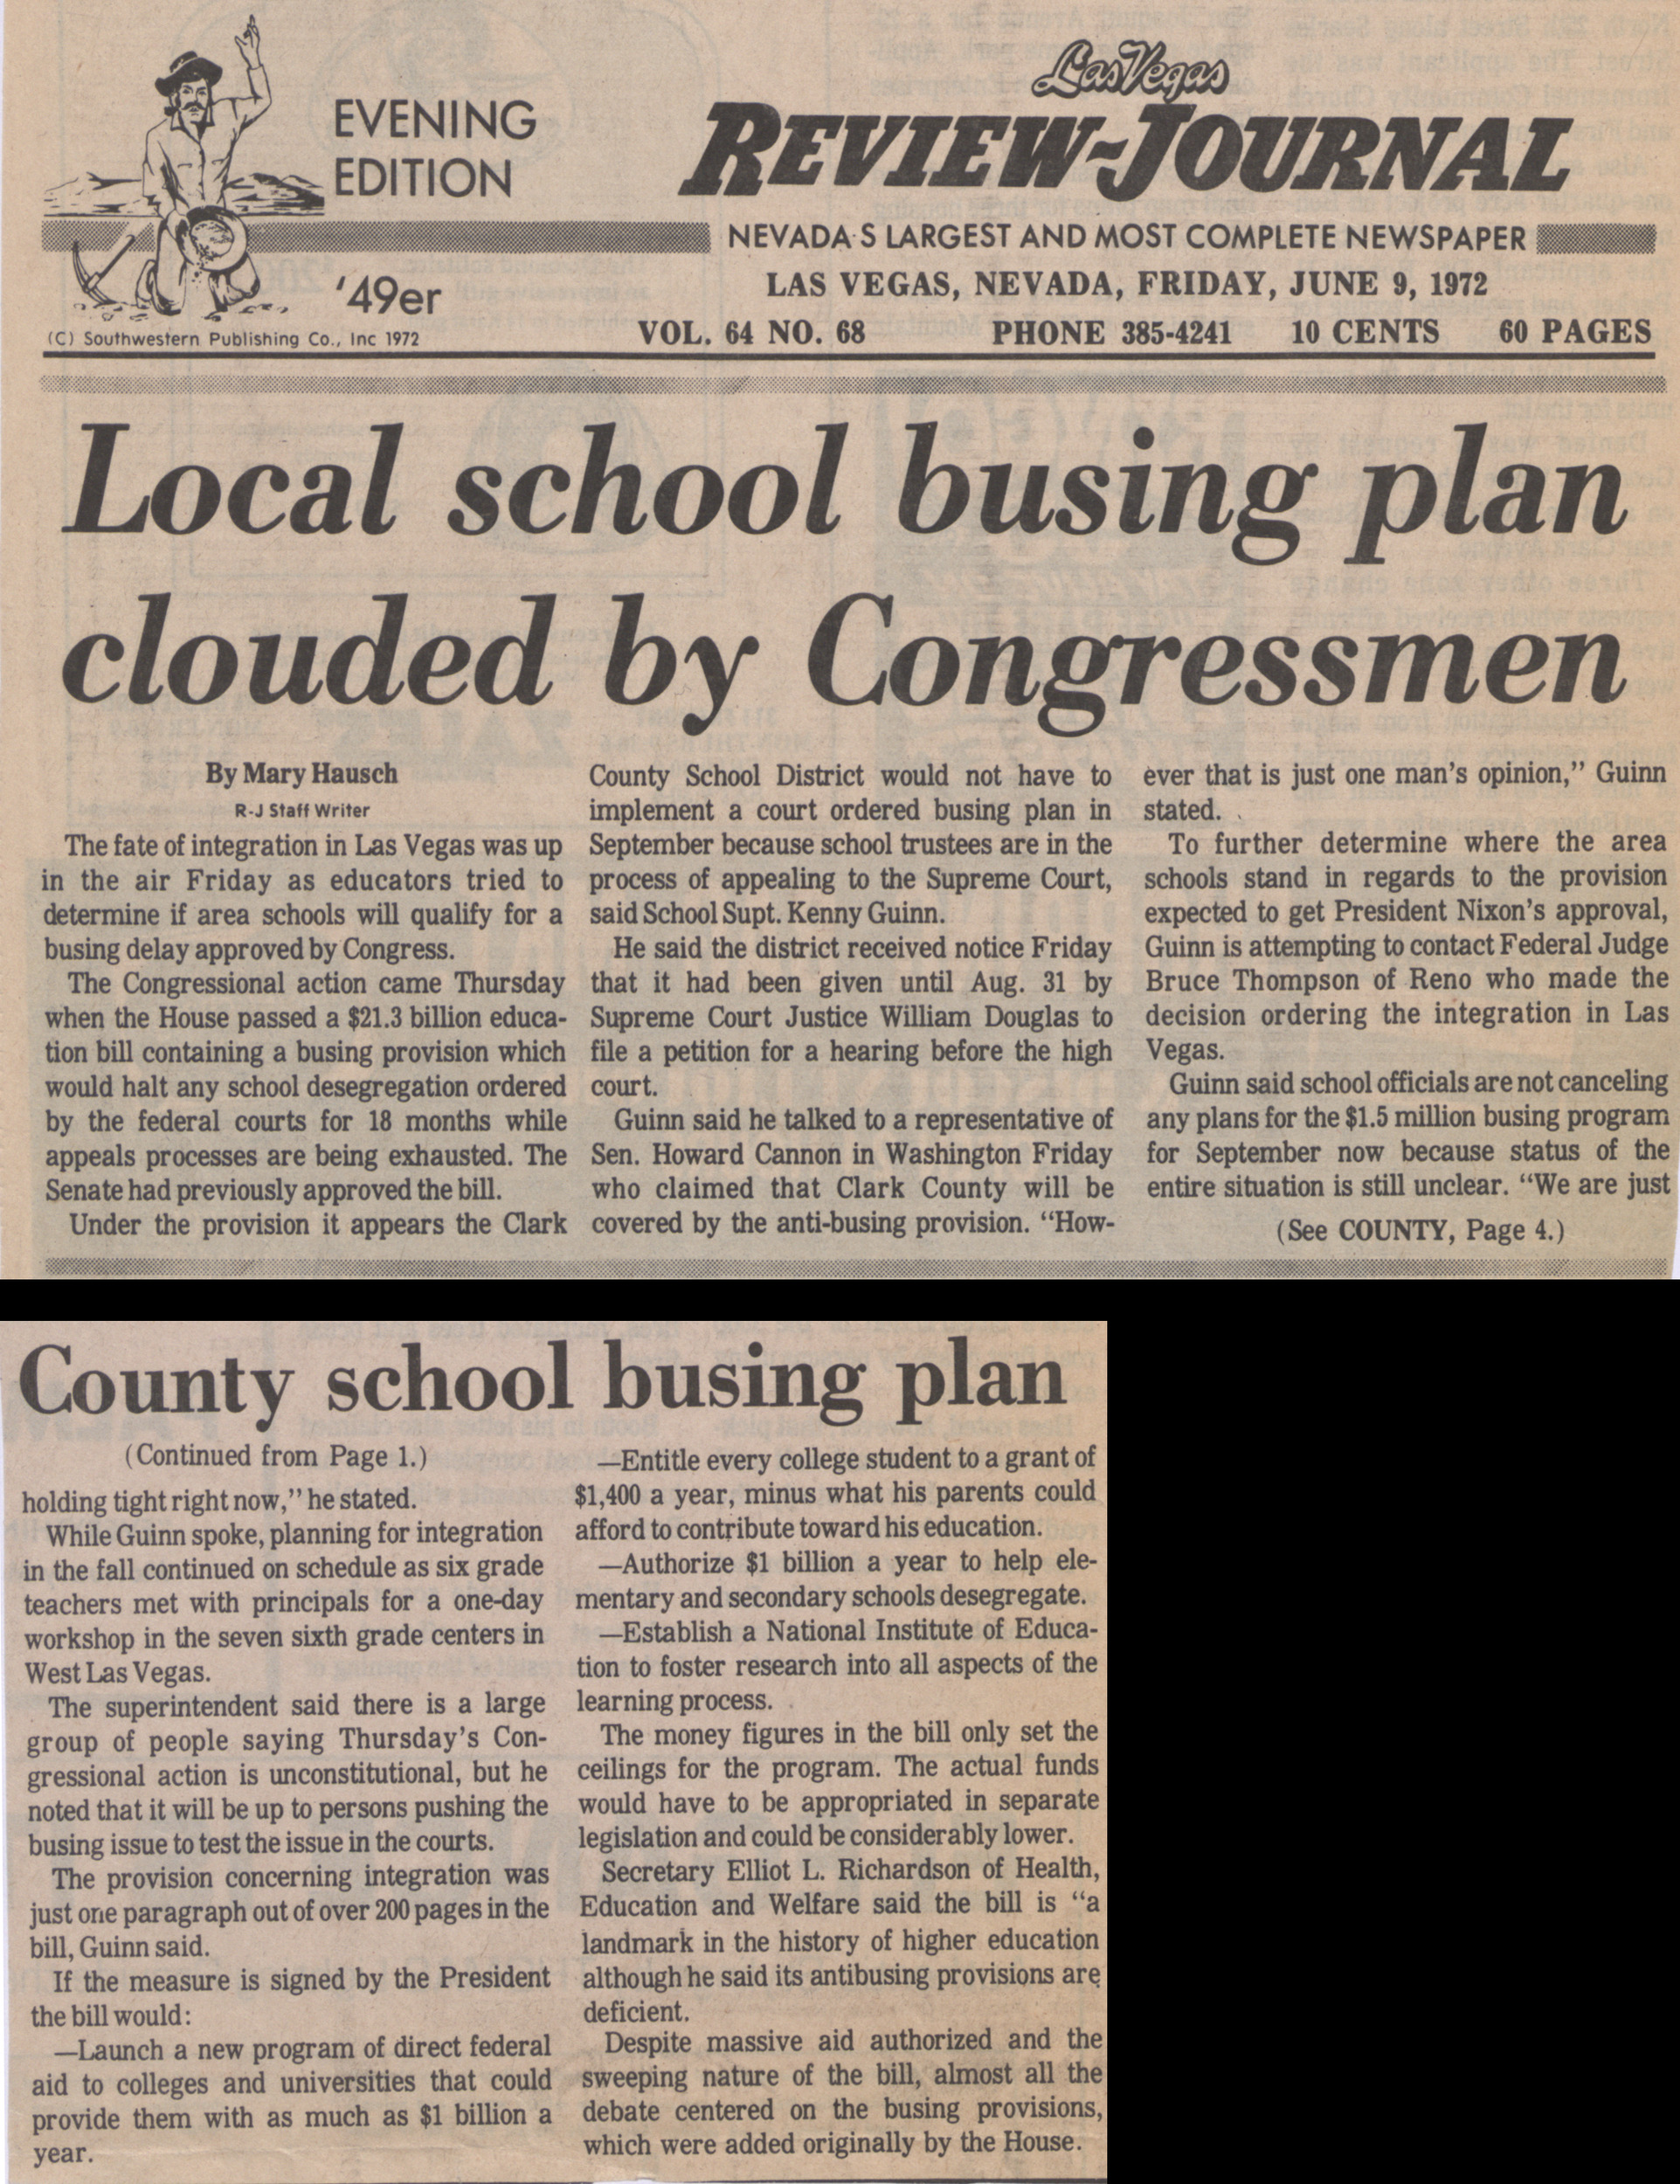 Newspaper clipping, Local school busing plan clouded by Congressmen, Las Vegas Review-Journal, evening edition, June 9, 1972